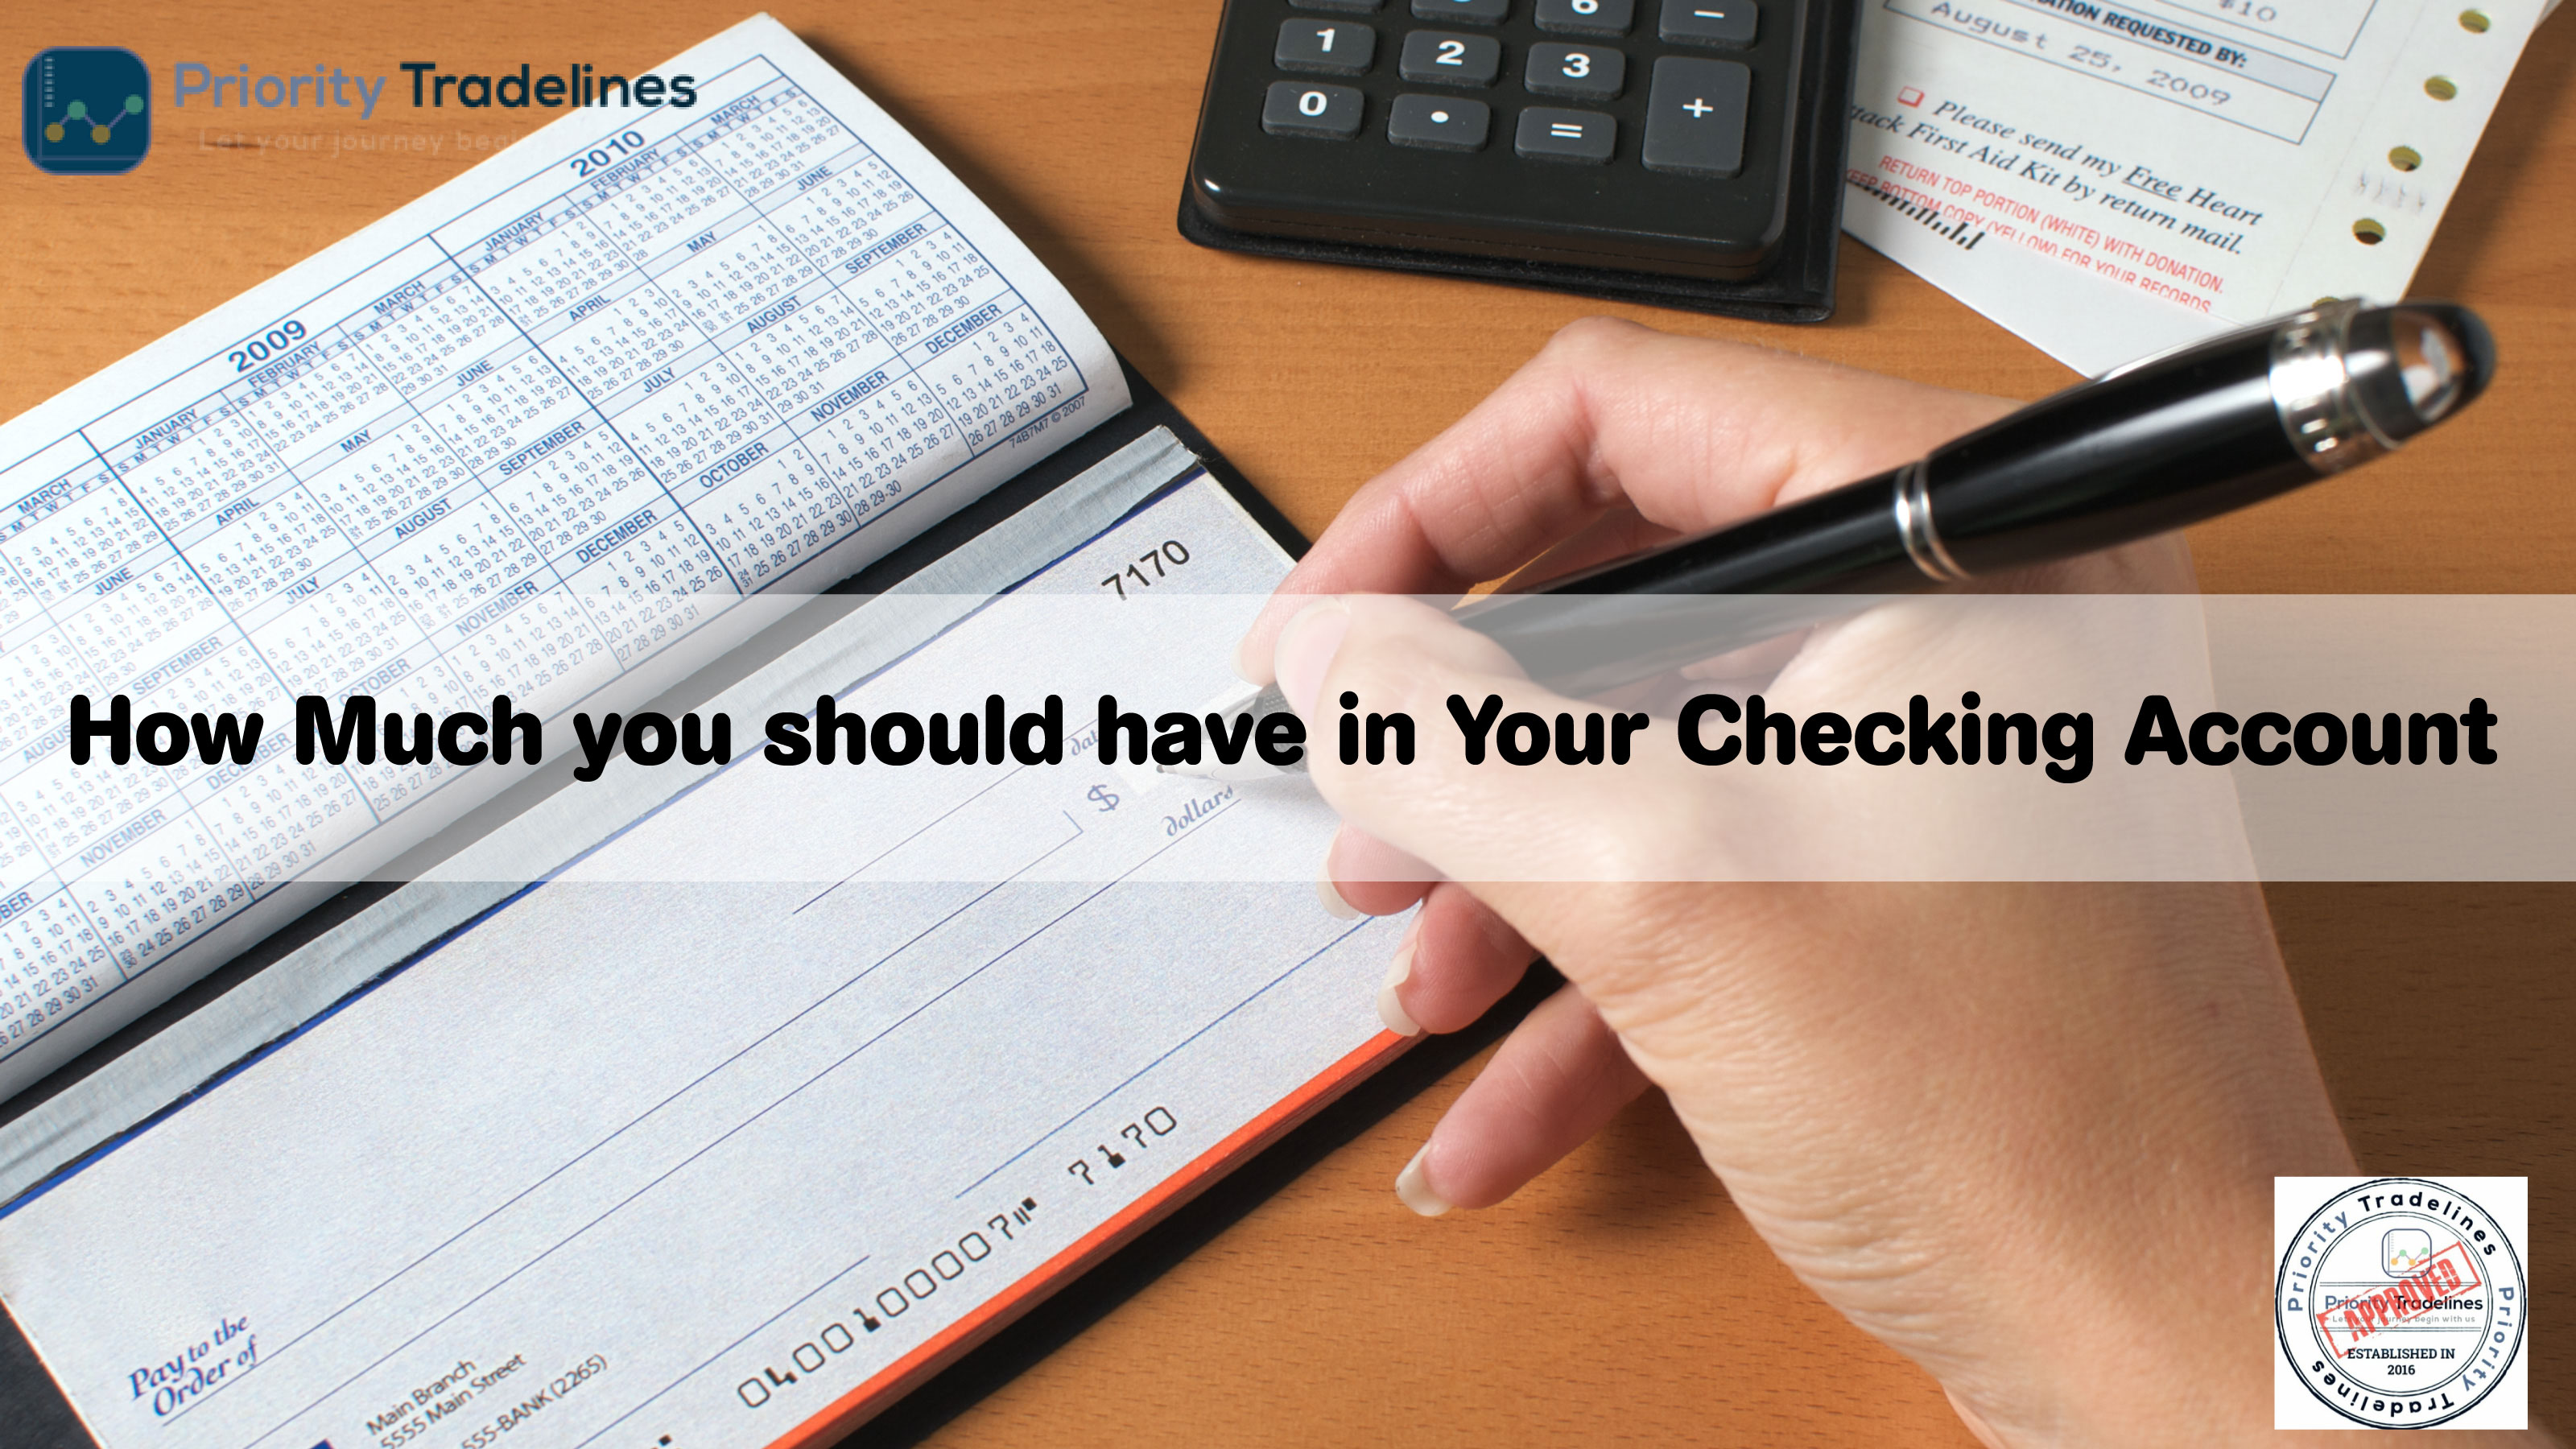 Experts How Much you should have in Your Checking Account